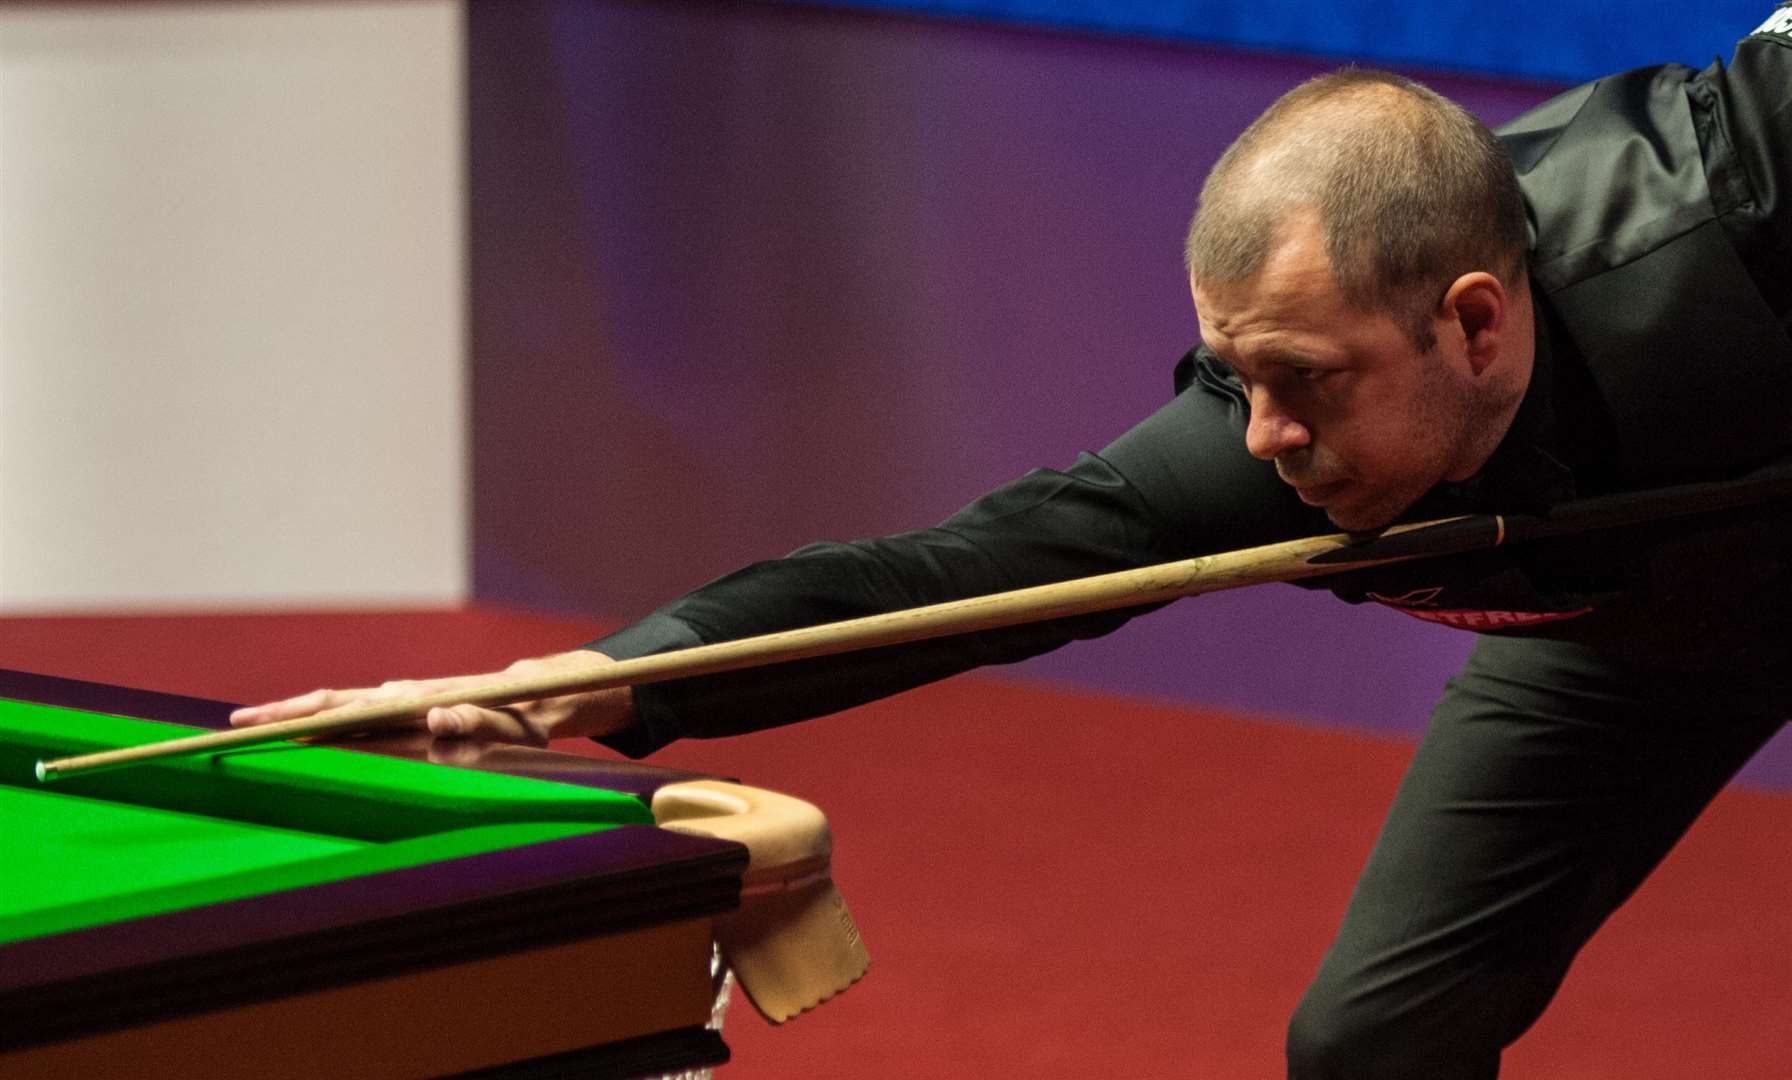 Barry Hawkins will play Ronnie O'Sullivan in the semi-finals of the Tour Championship Picture: World Snooker